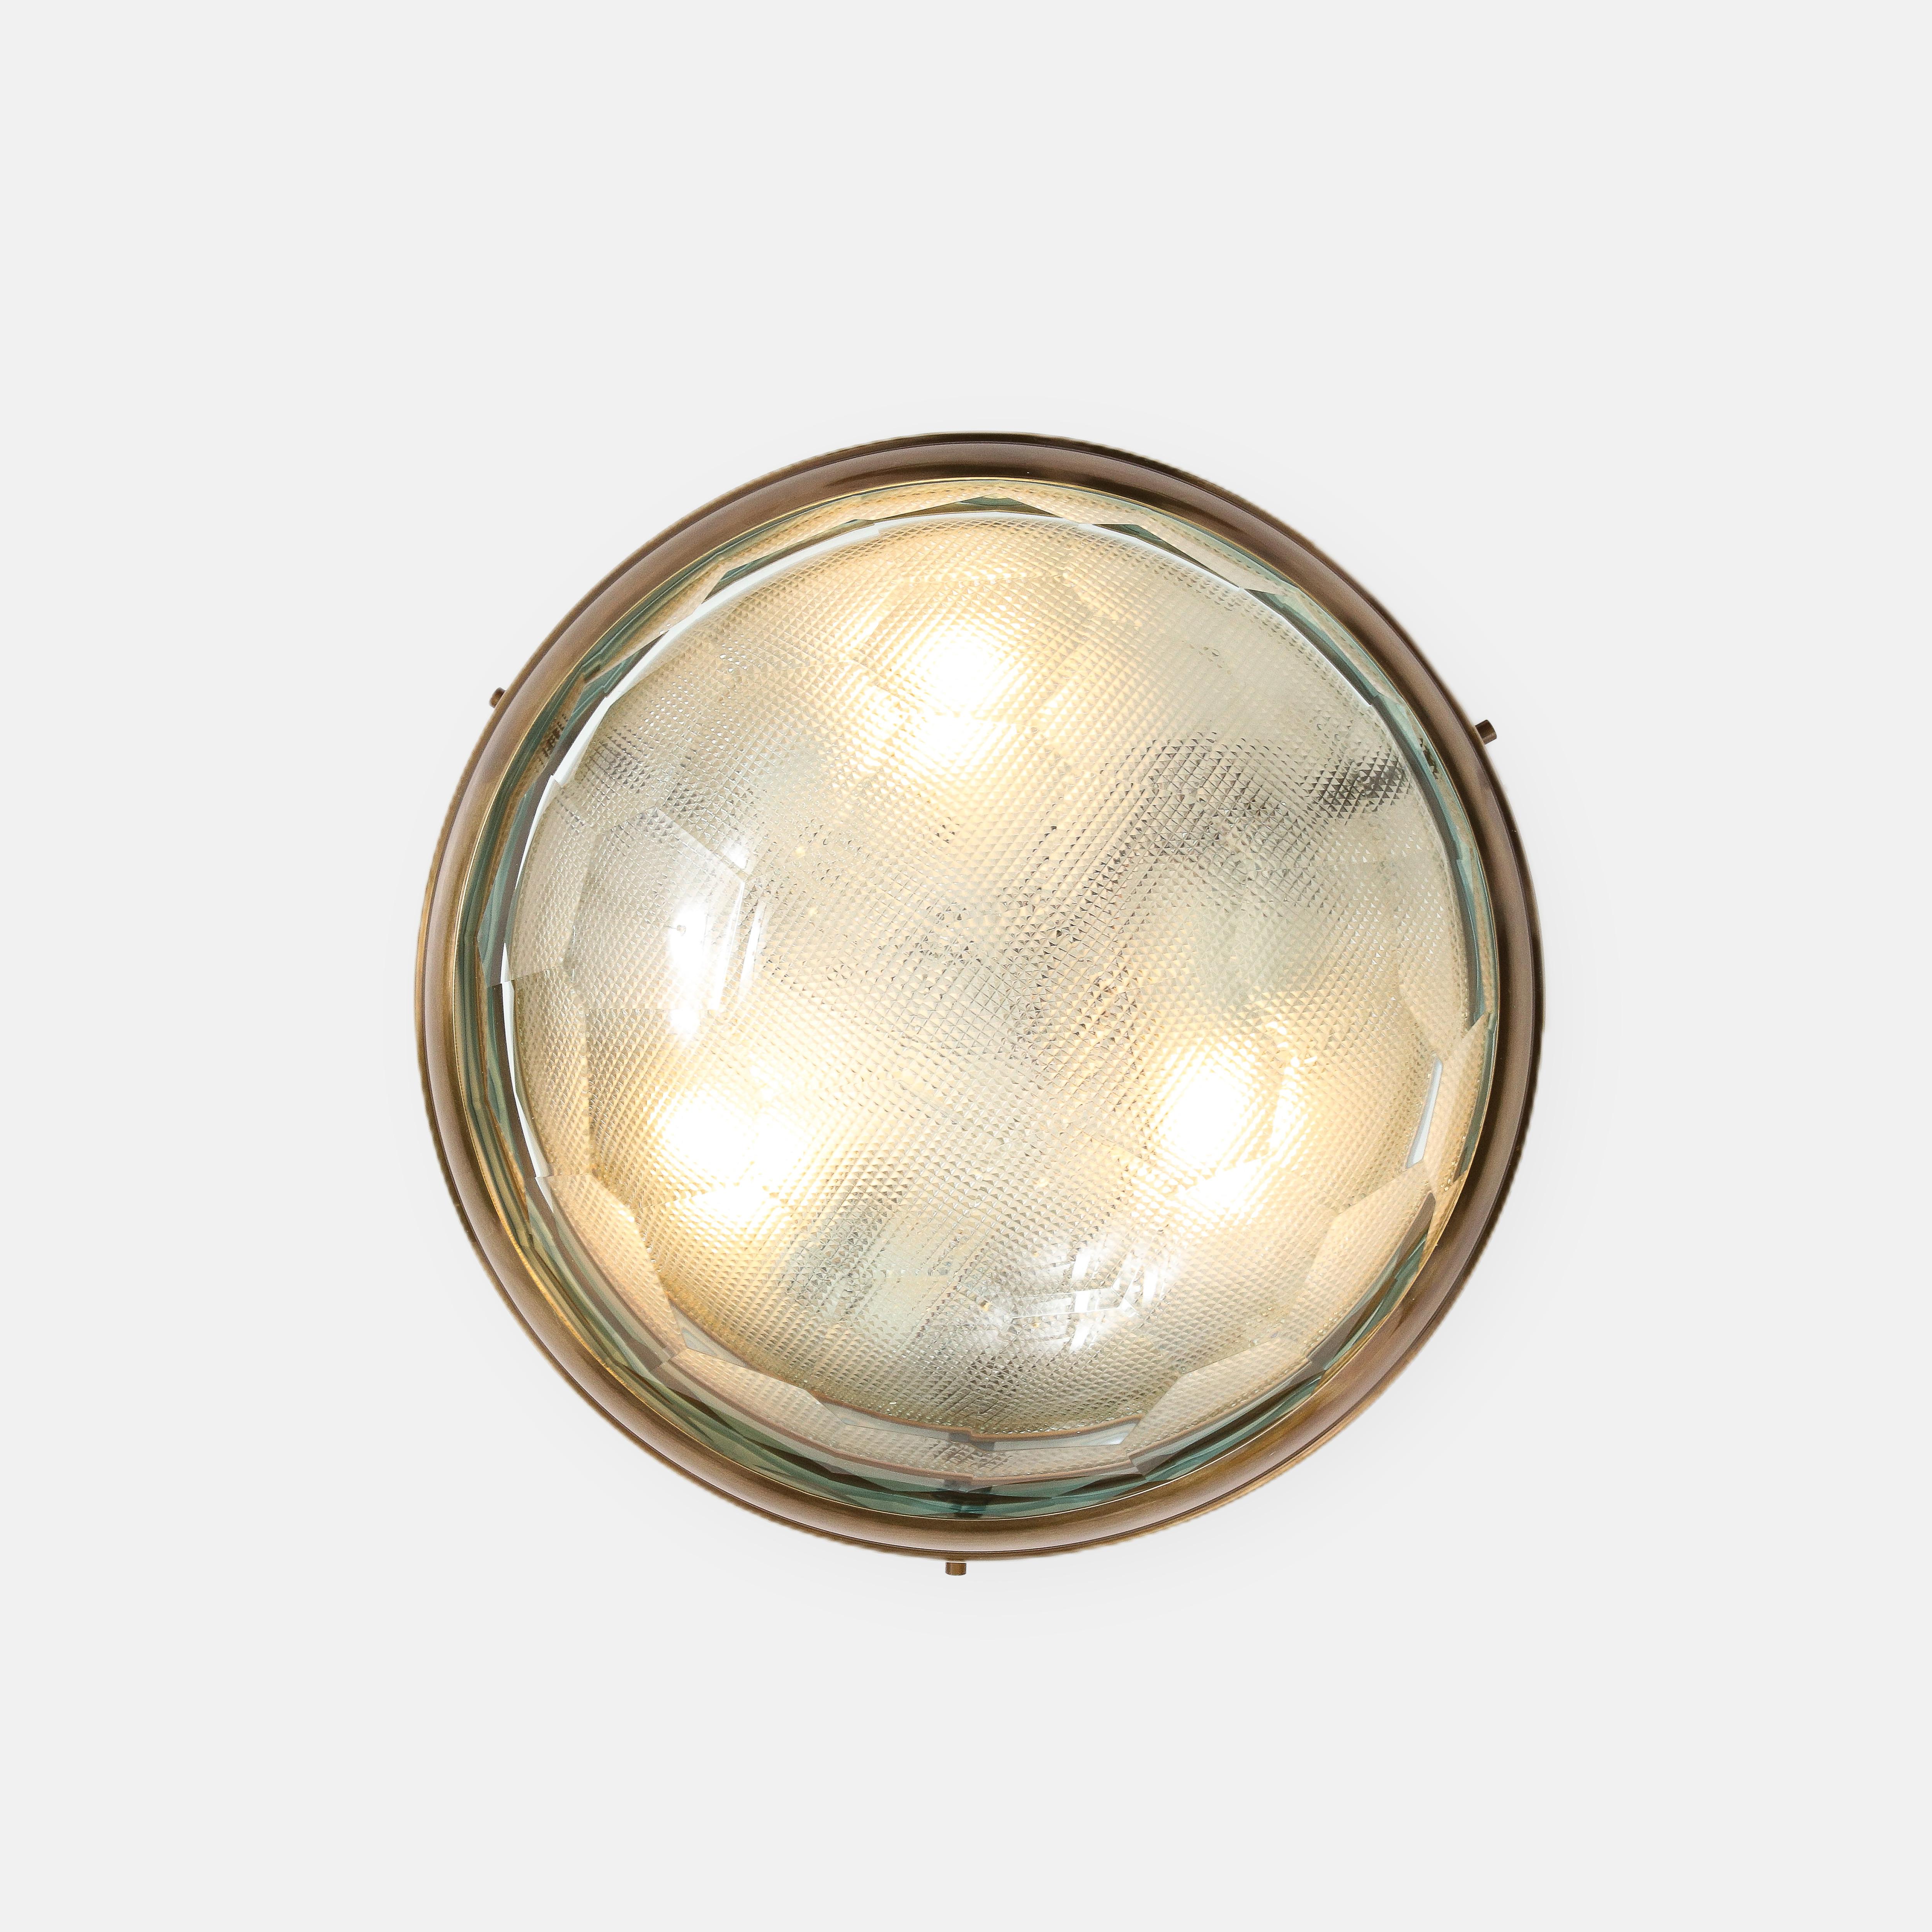 Faceted Glass Flush Mount Ceiling Light in Style of Fontana Arte, 1960s In Good Condition For Sale In New York, NY